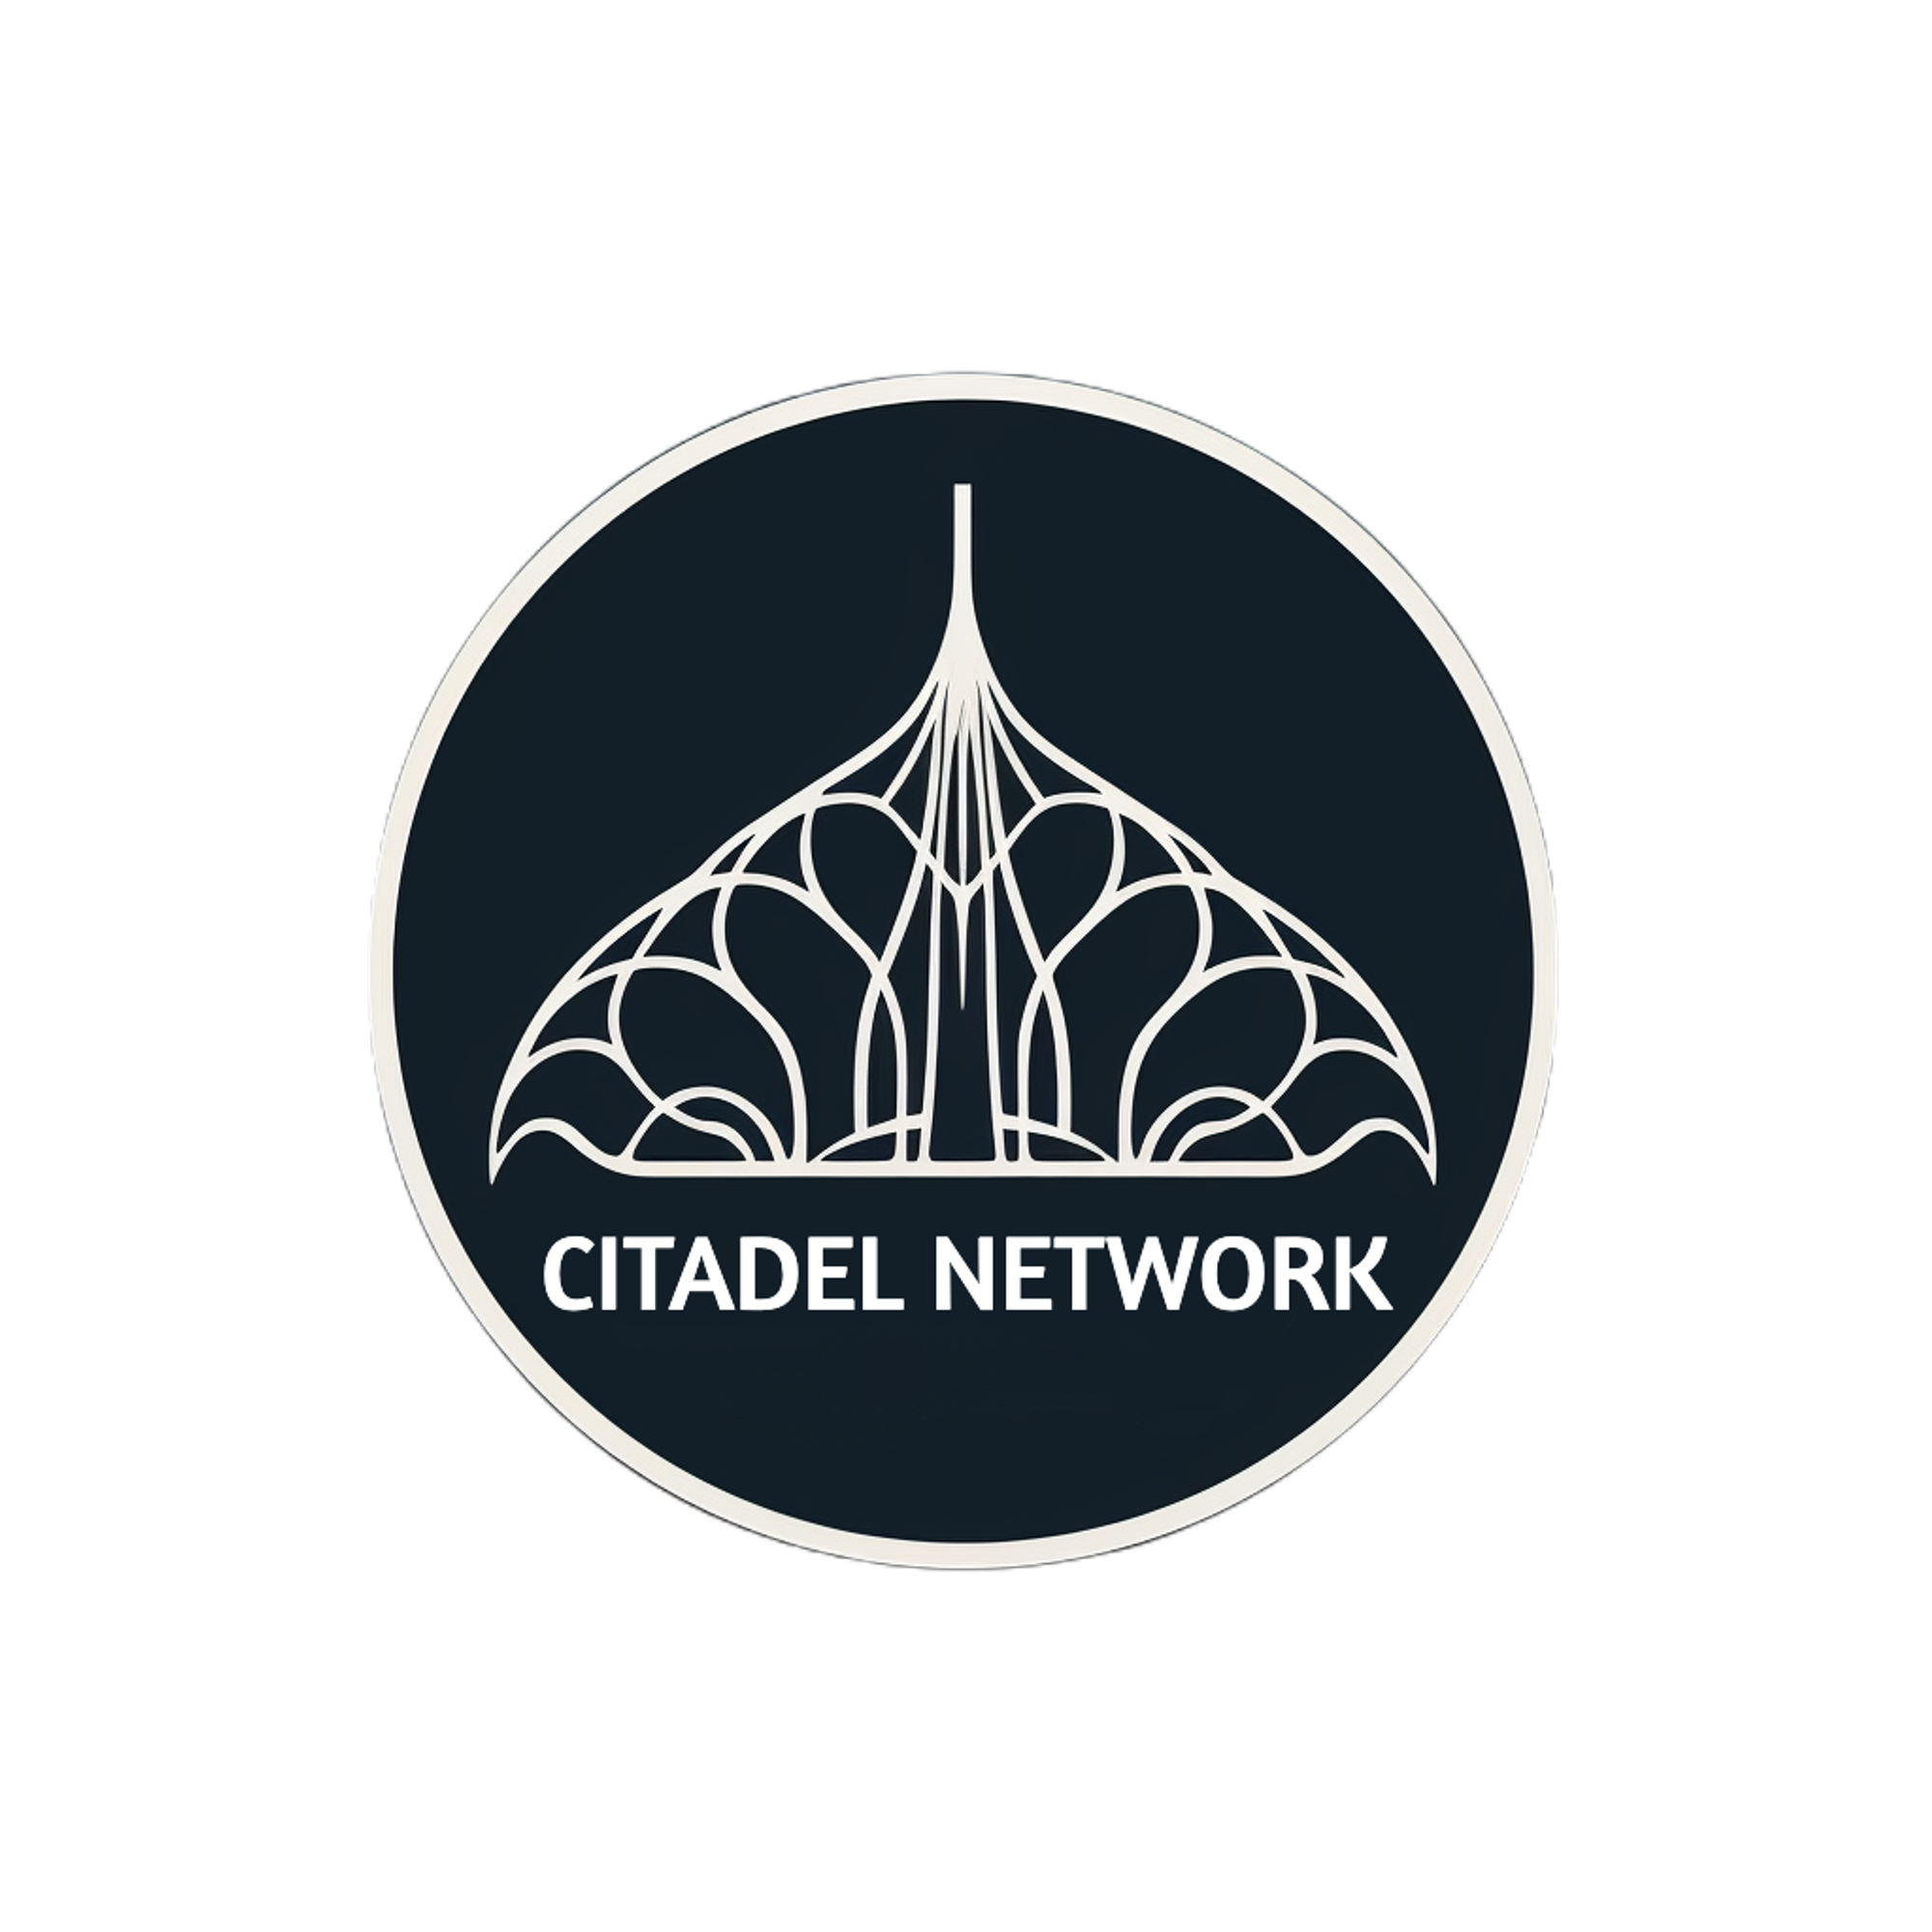 developed by Citadel Network